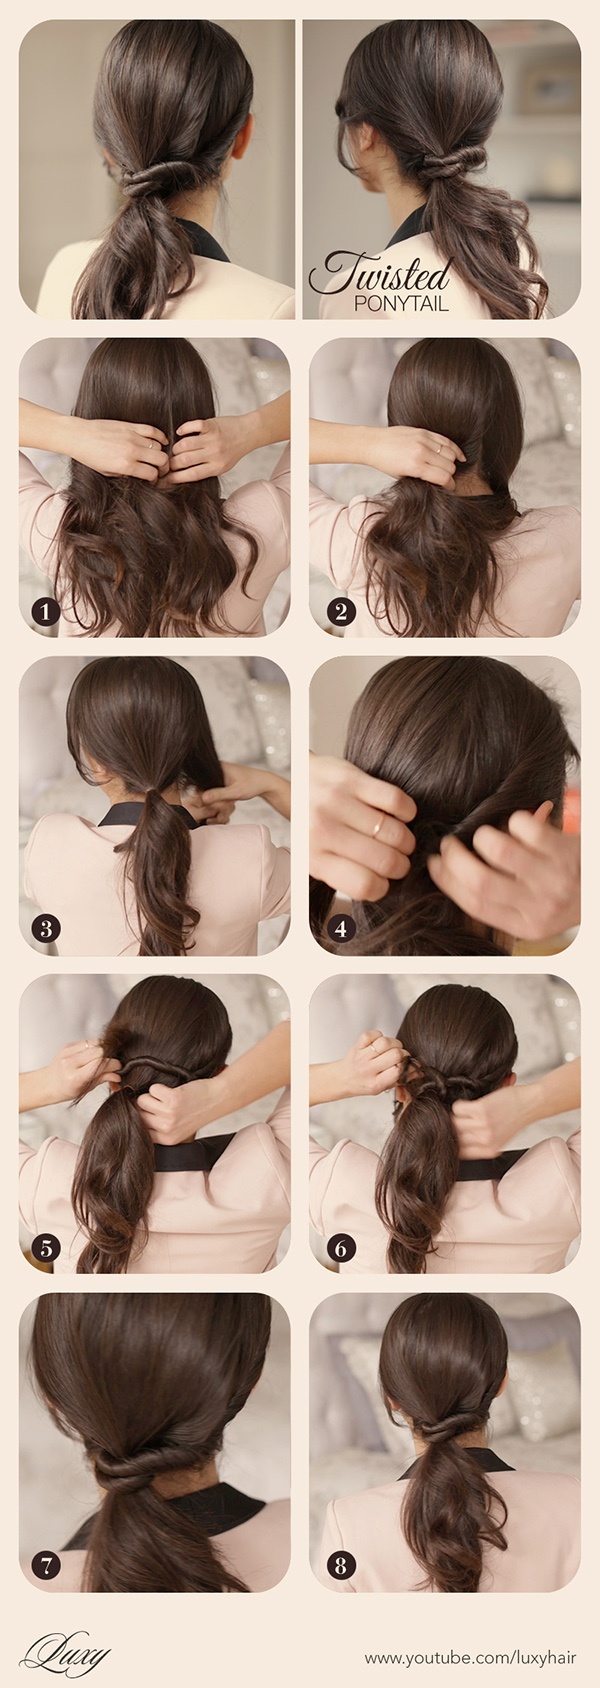 Ponytails with simple twists "width =" 458 "class =" size-full wp-image-43089